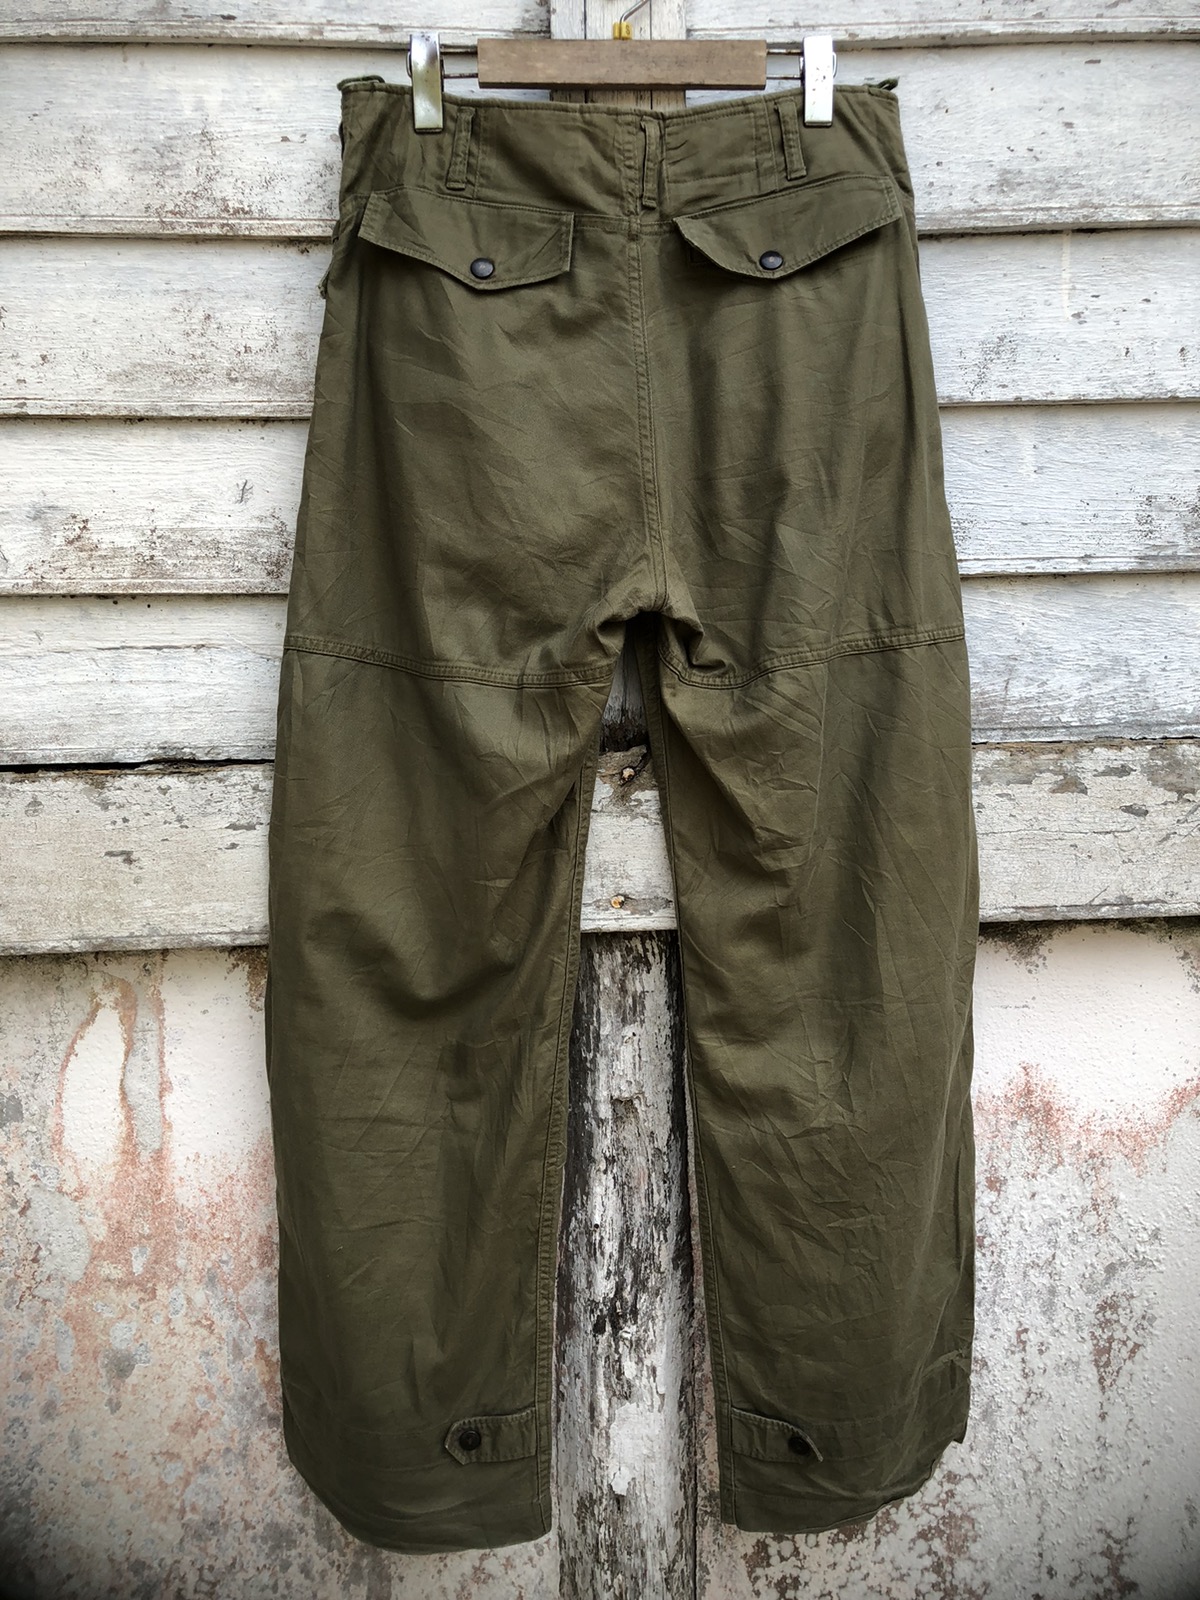 N. Hollywood Military Issues Trouser - 4